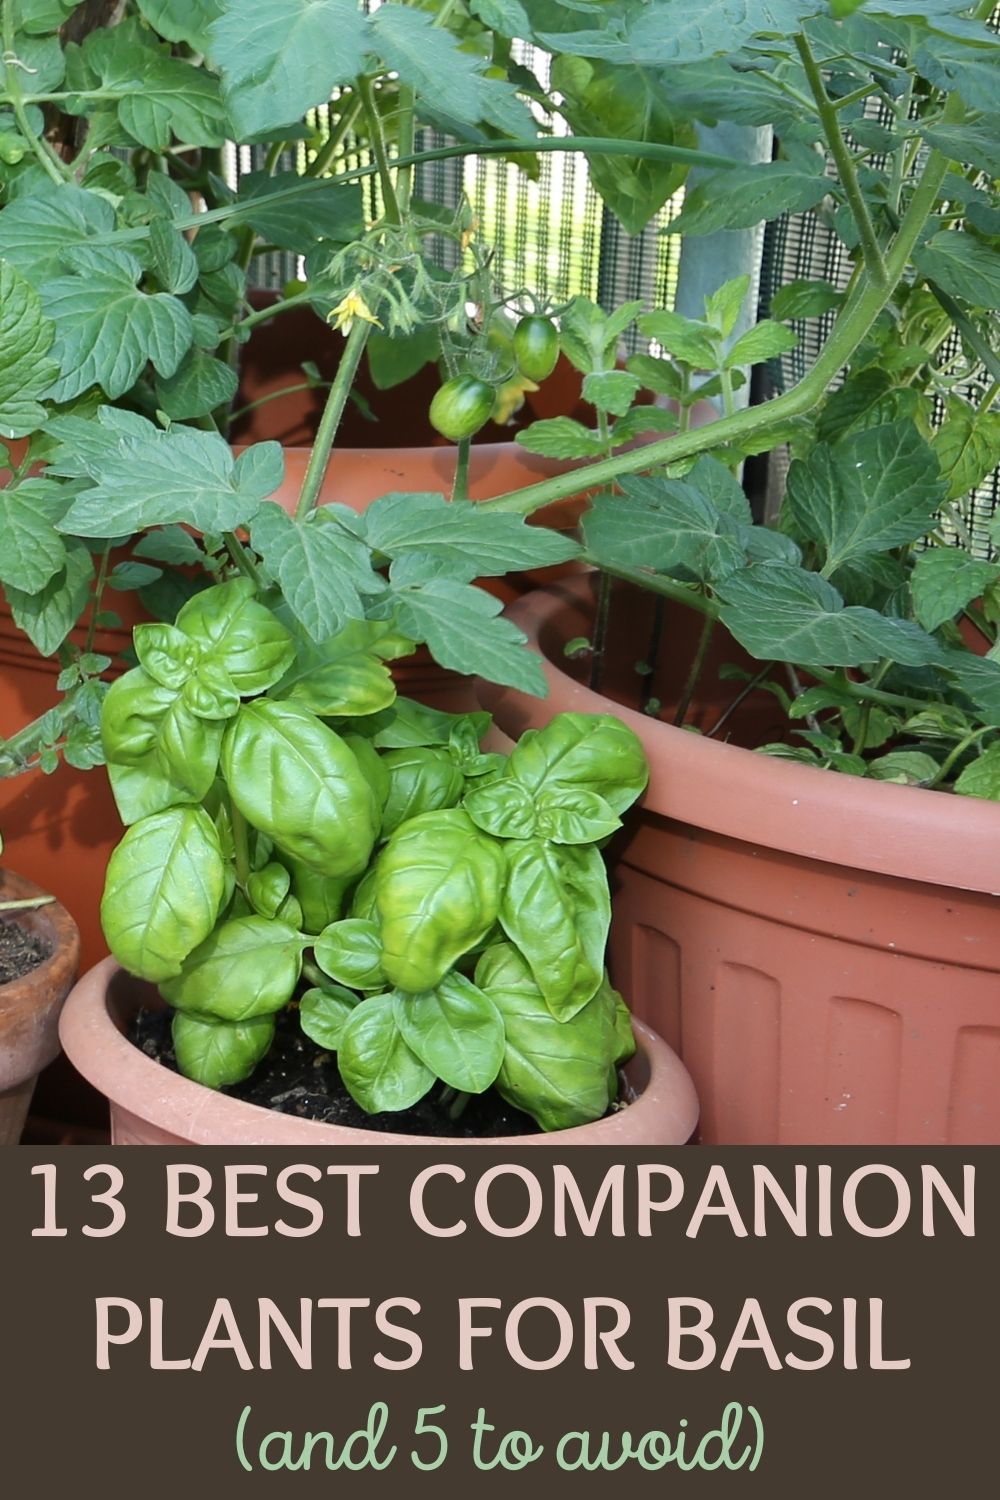 13 best companion plants for basil, and 5 to avoid